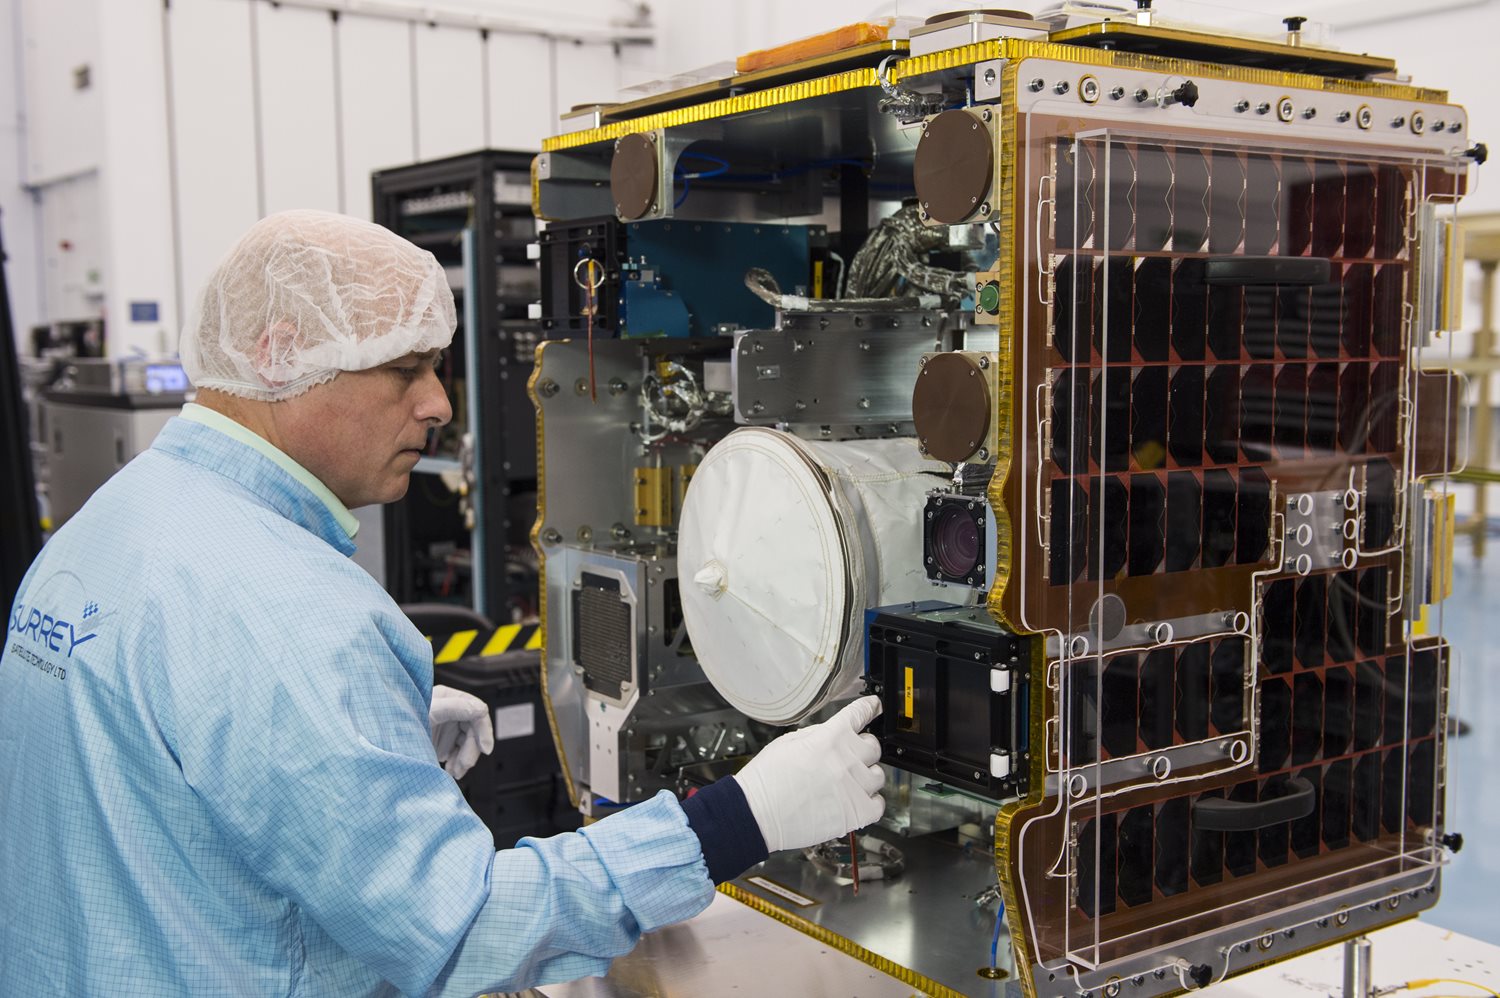 SSTL ships RemoveDEBRIS mission for ISS launch